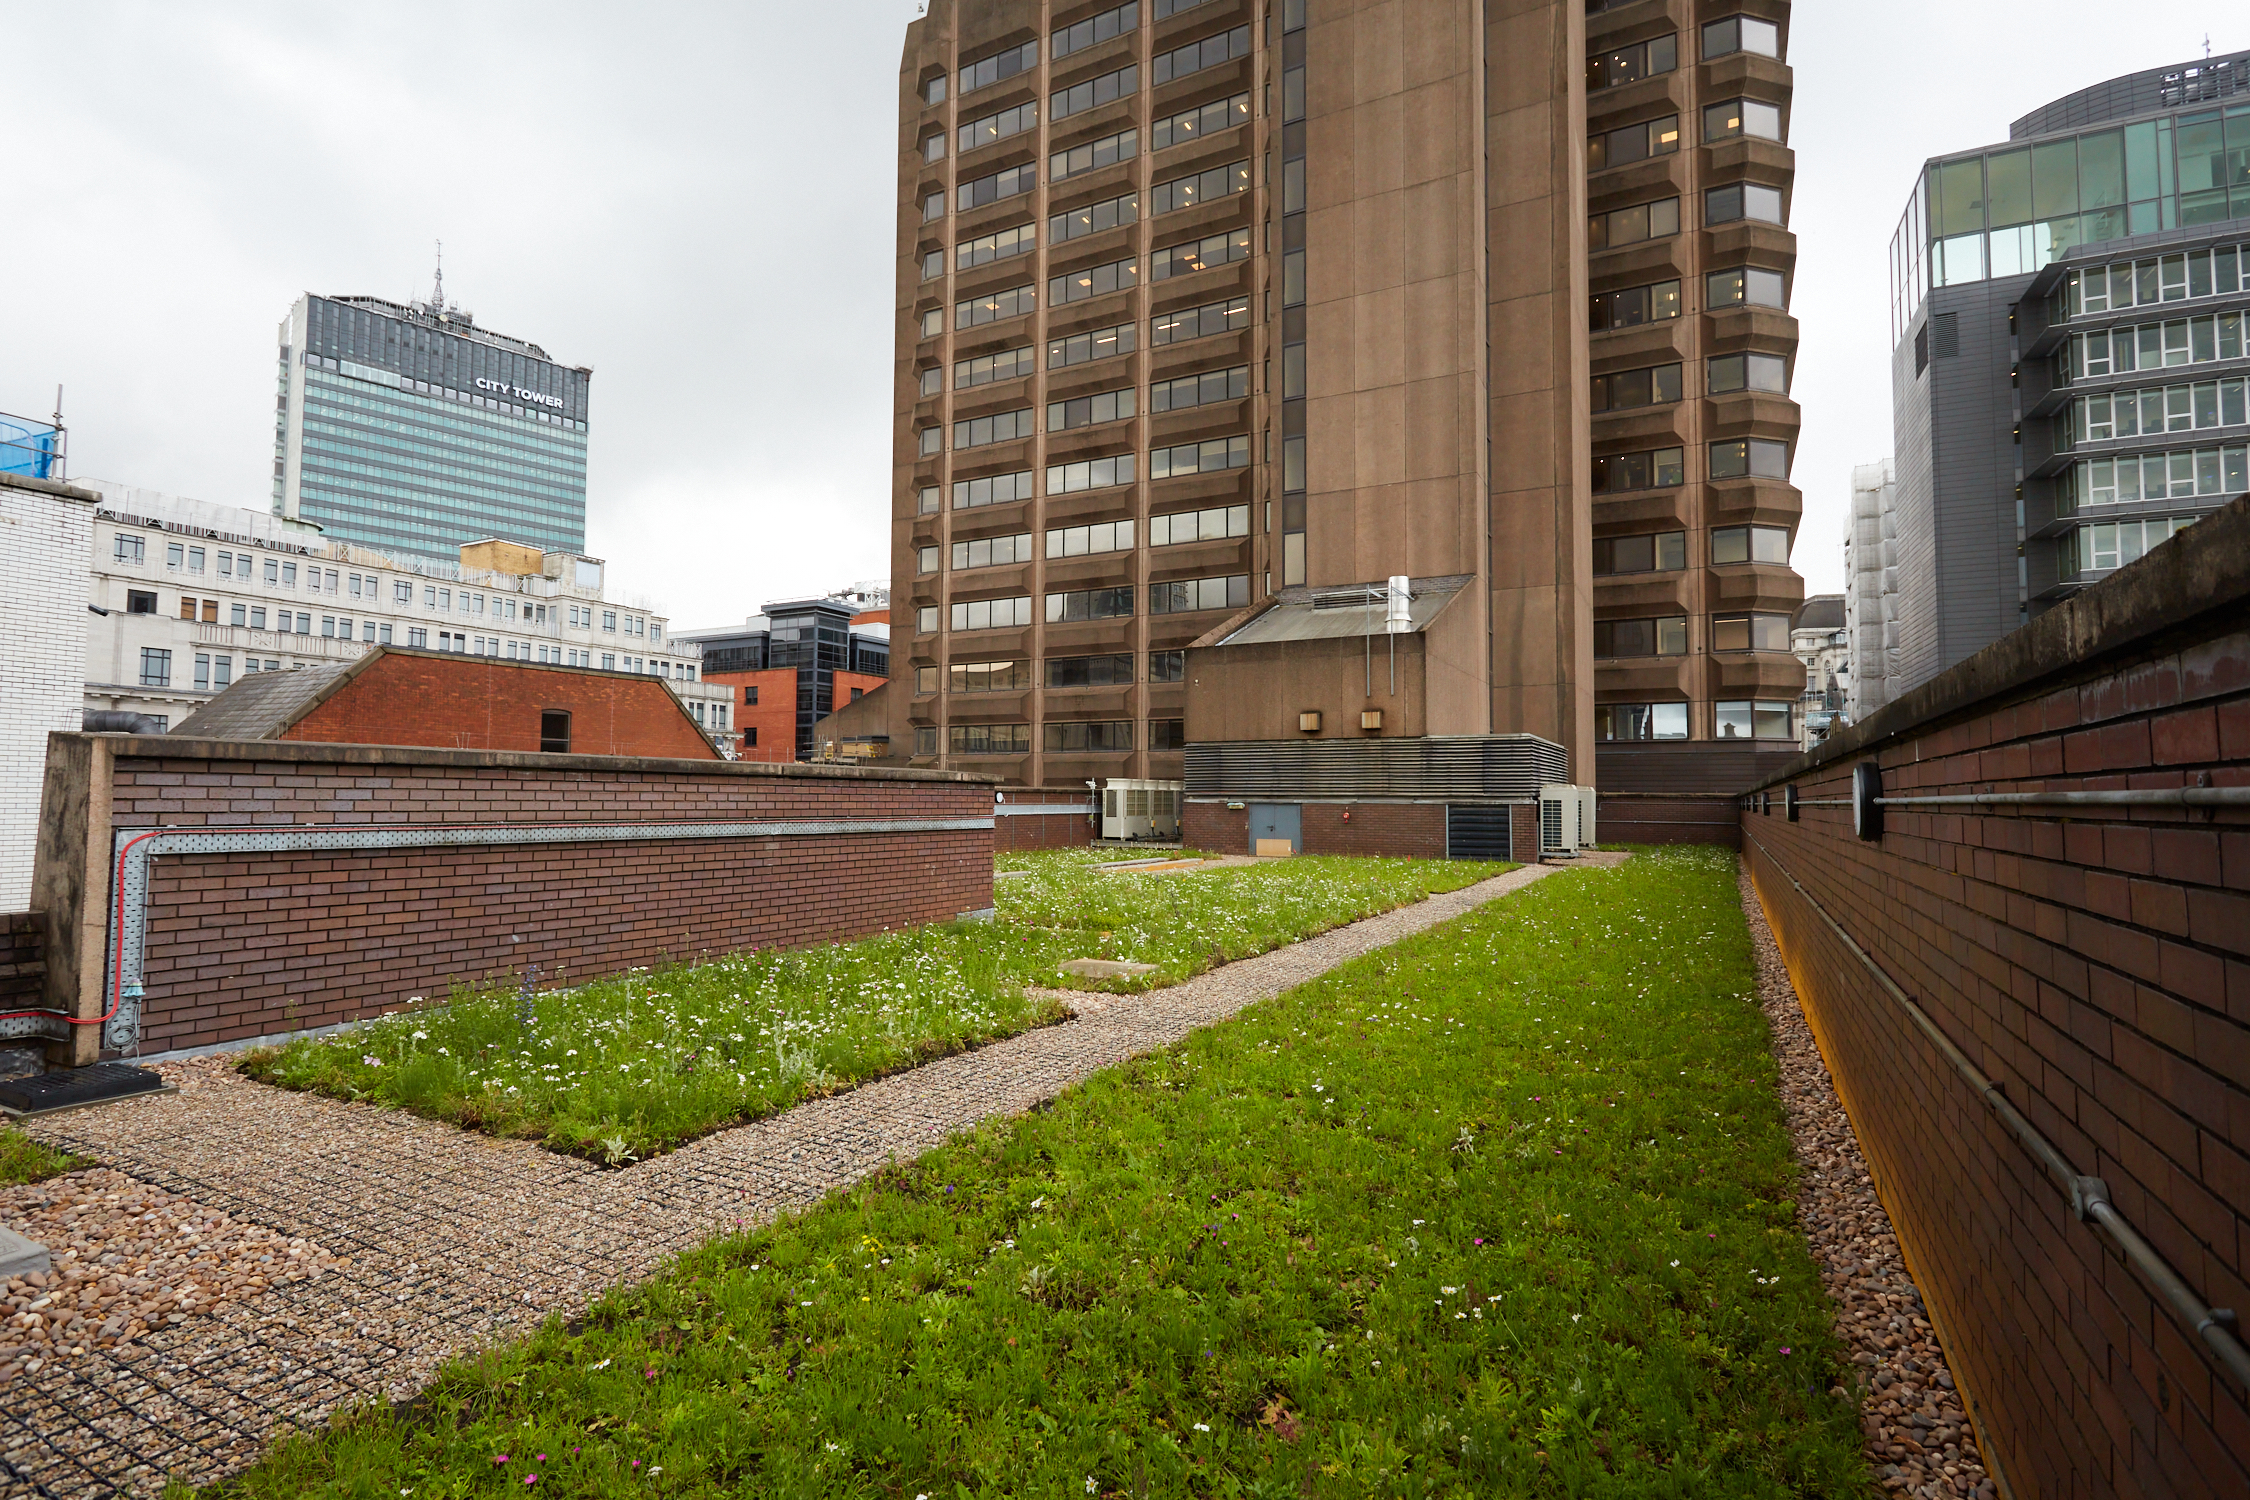  A ground-breaking climate and water resilience research roof sited on Bloc, Manchester - Polypipe Civils & Green Urbanisation